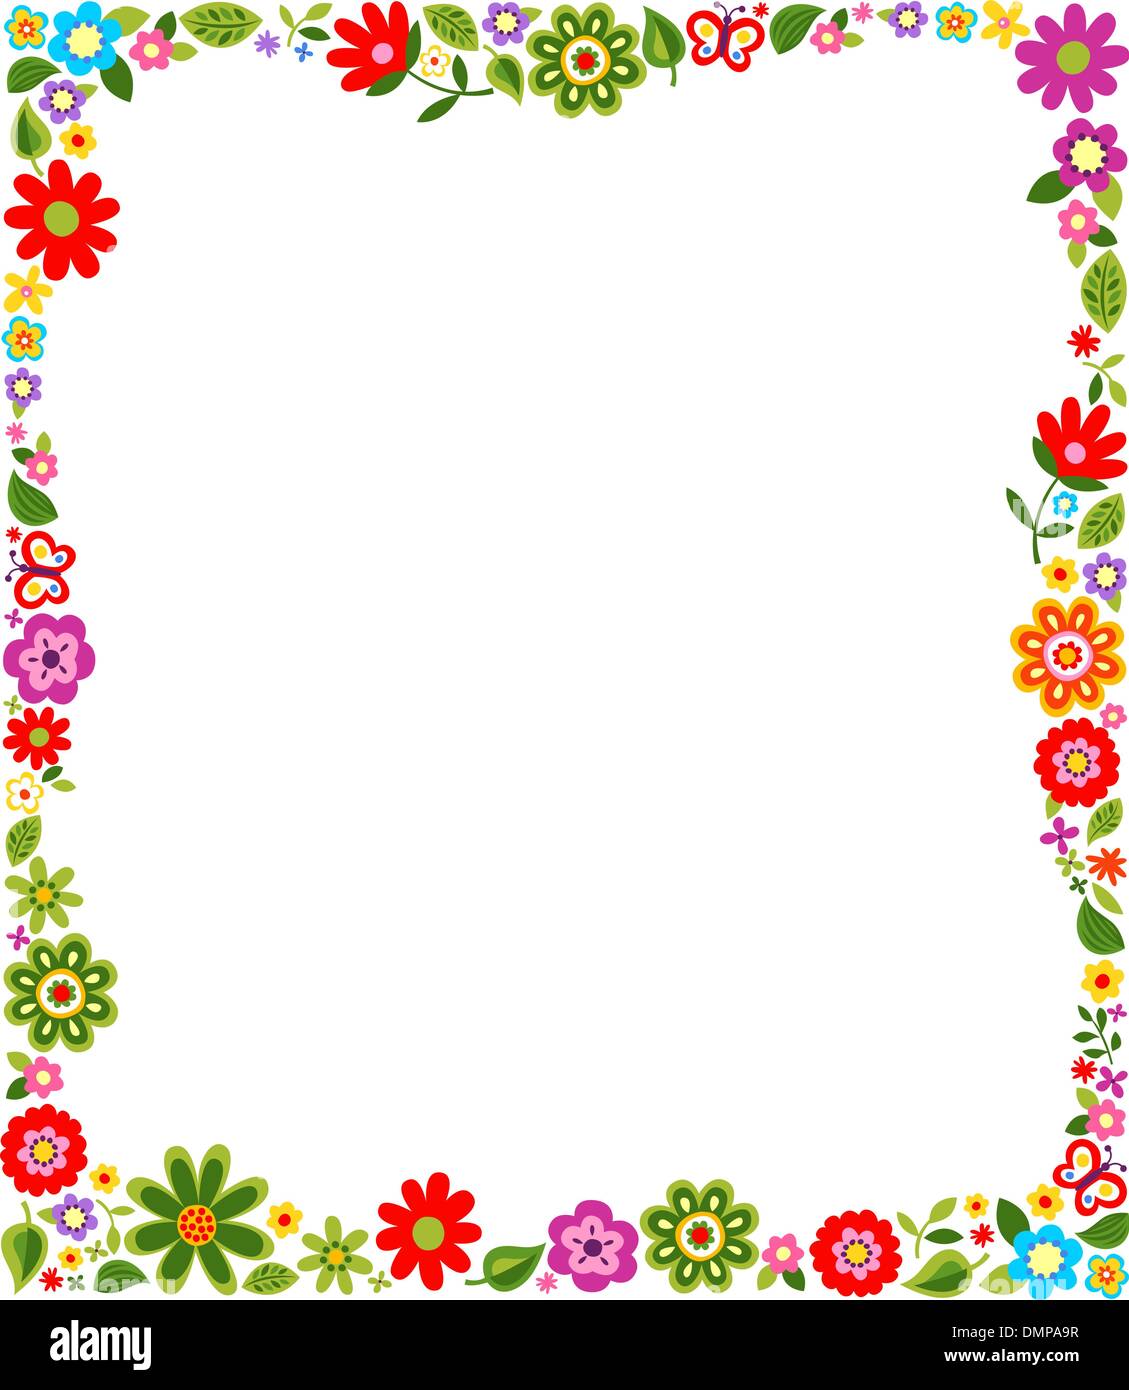 cute floral border pattern Stock Vector